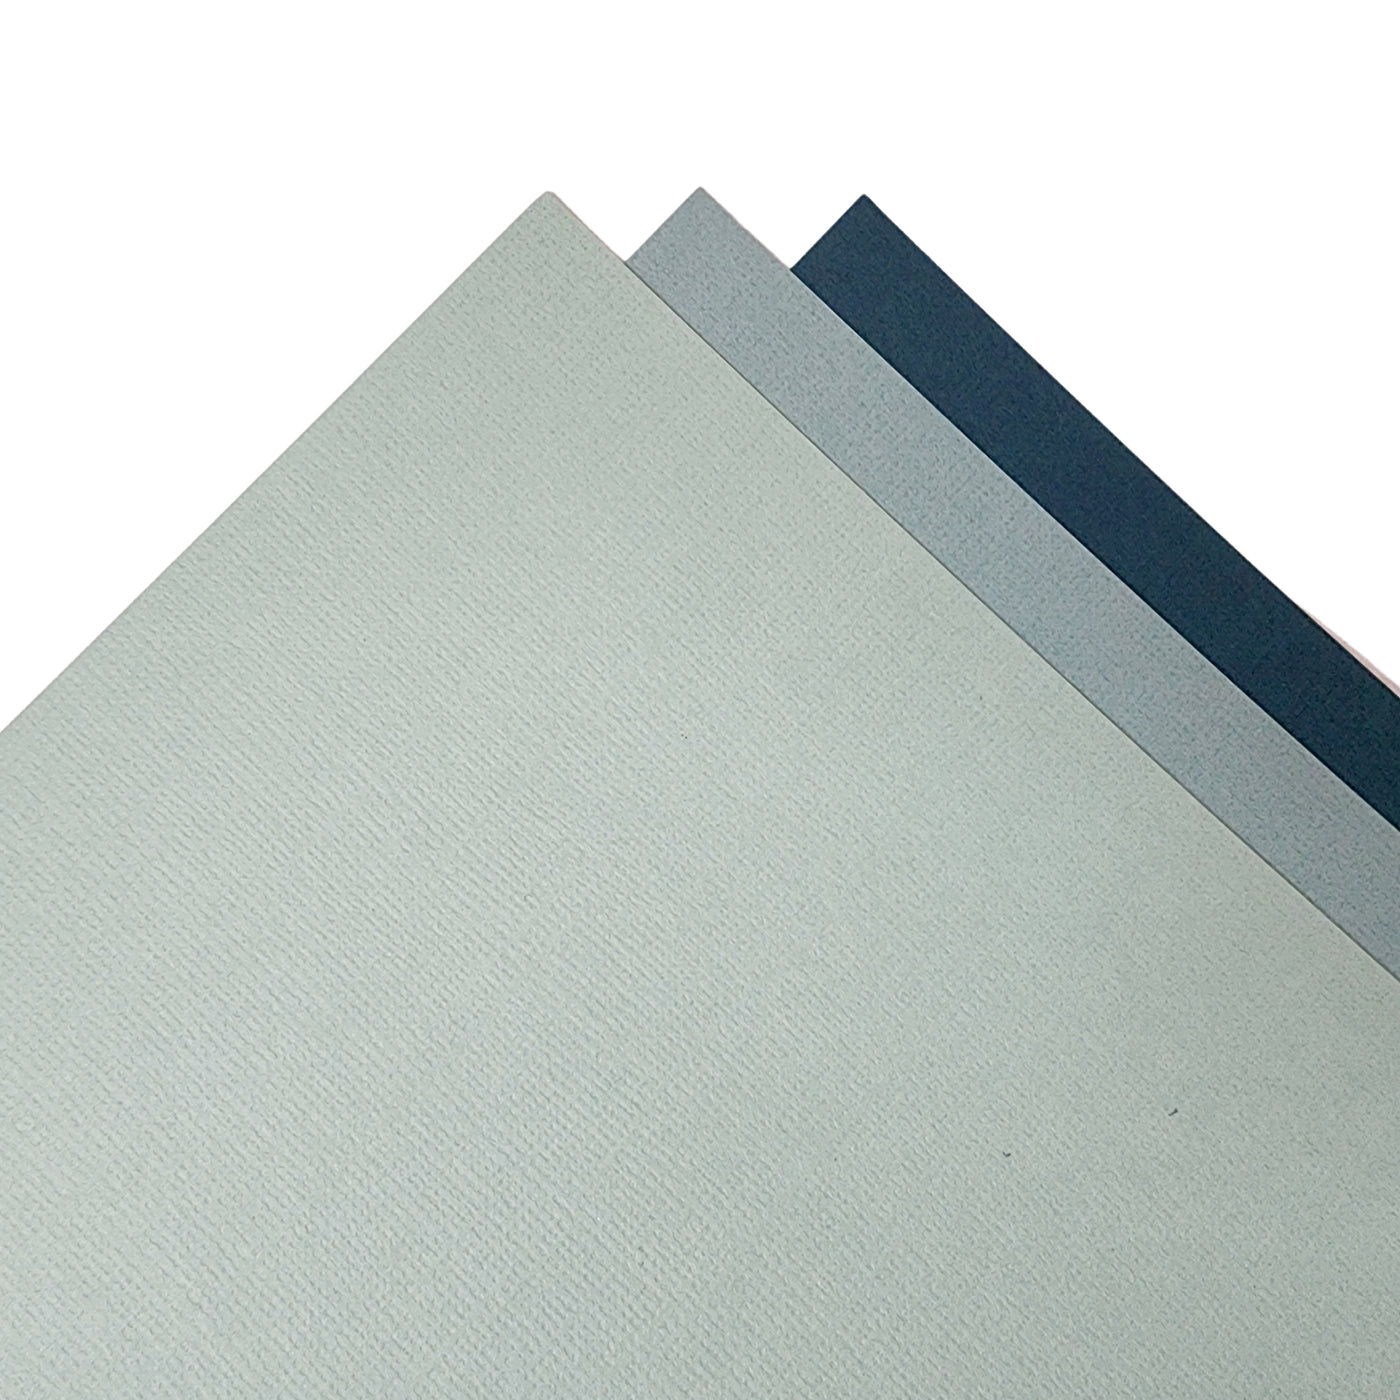 The Blue-Green monochromatic assortment includes three (3) each of four (3) shades of blue-green colors of Bazzill textured cardstock.